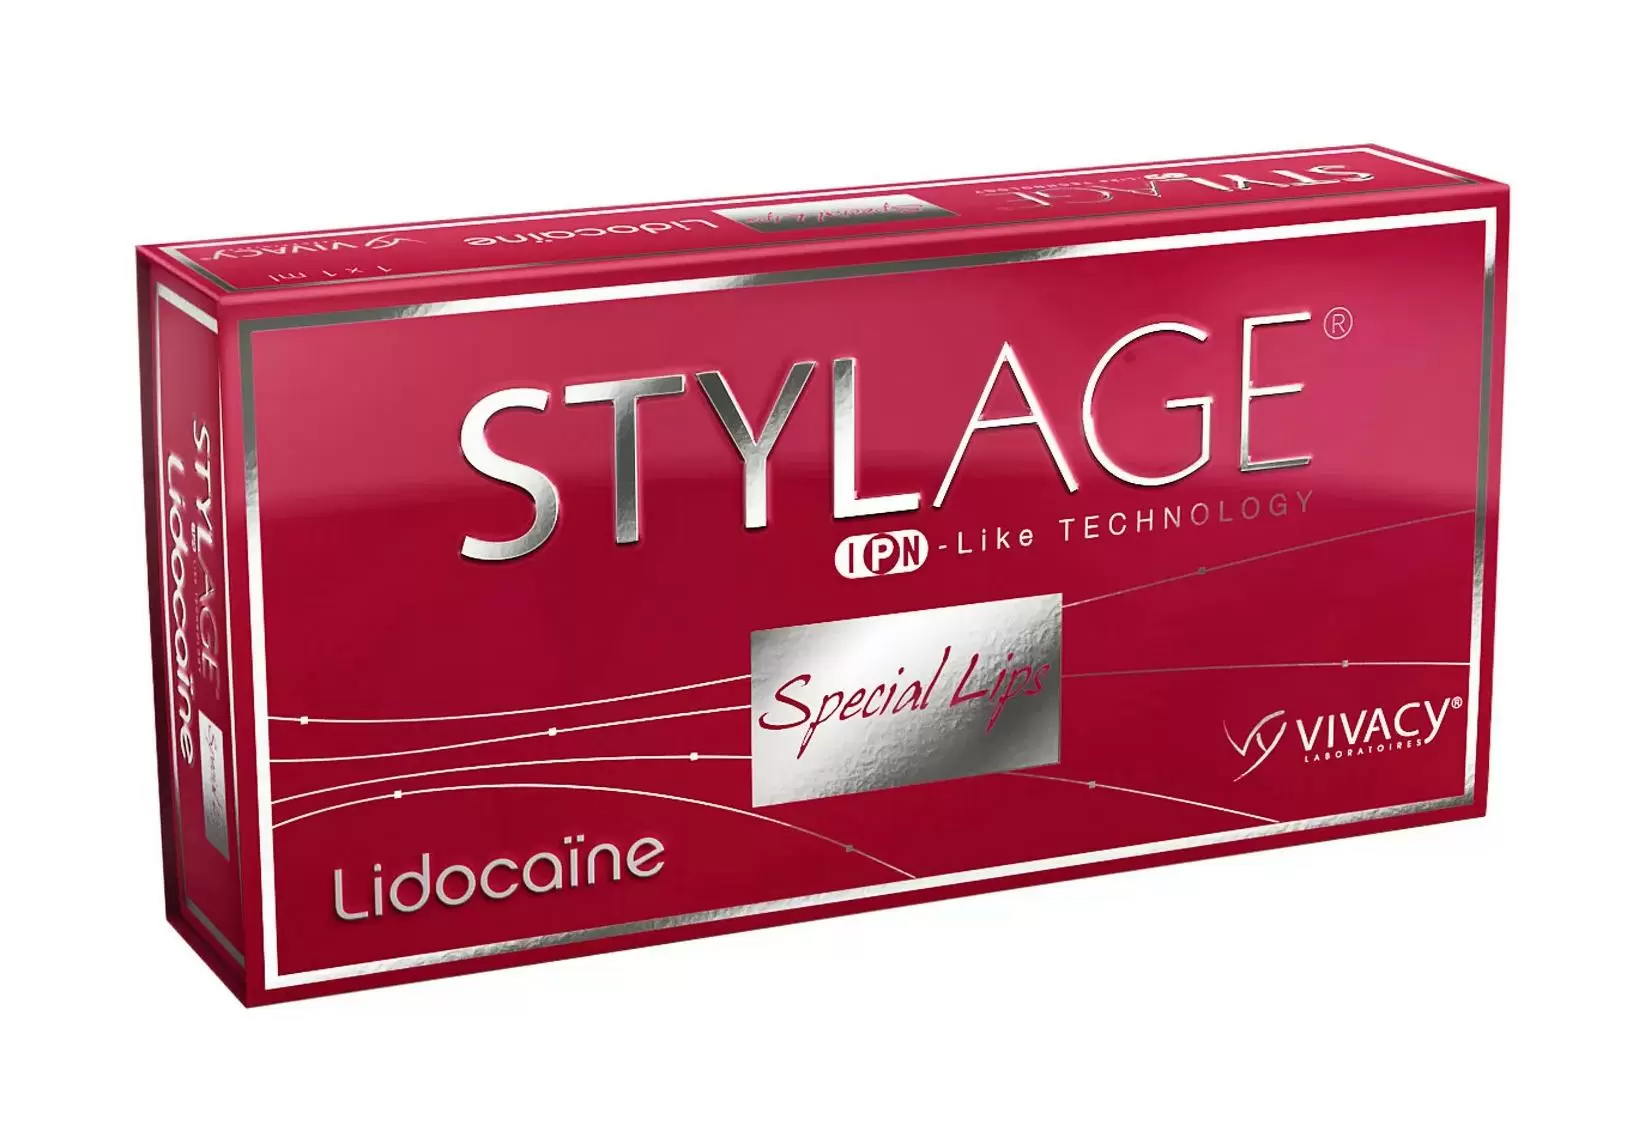 Stylage m цена. Stylage Special Lips Lidocaine 1 мл. Stylage филлер 1.1. Stylage m филлер 1 ml. Stylage Special Lips.